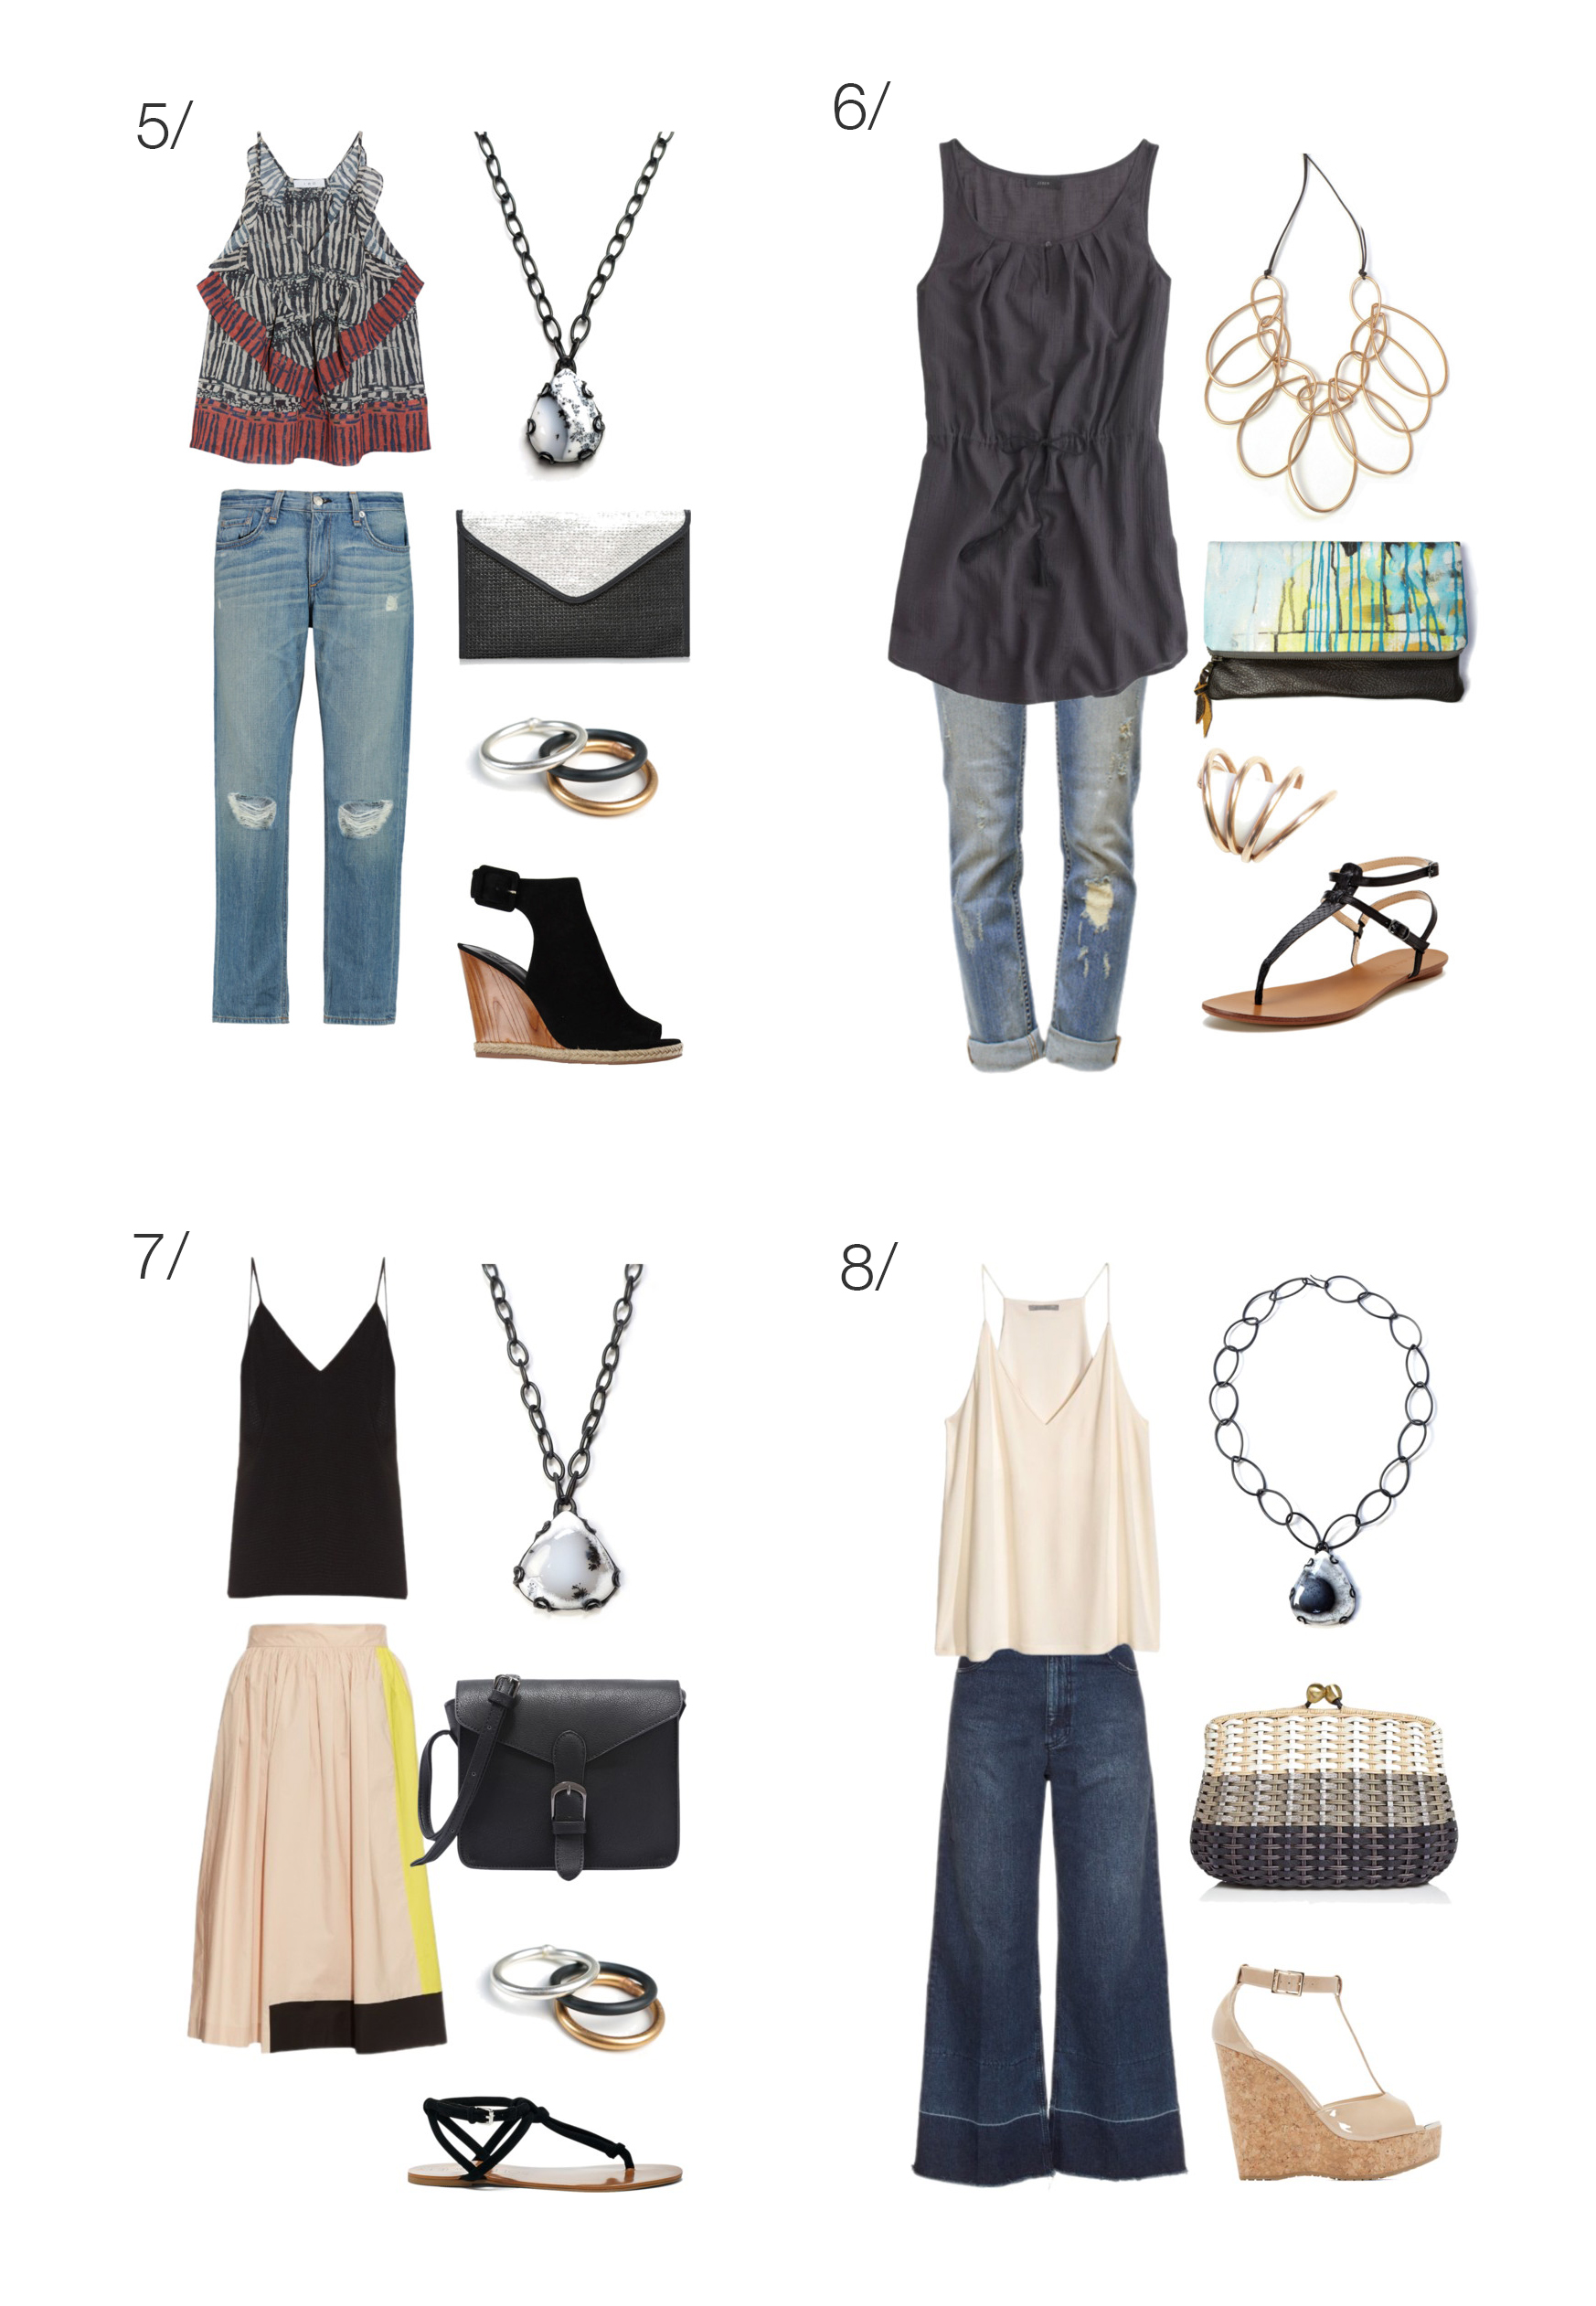 what to wear on a casual summer date night: 8 outfit ideas // click through for outfit details